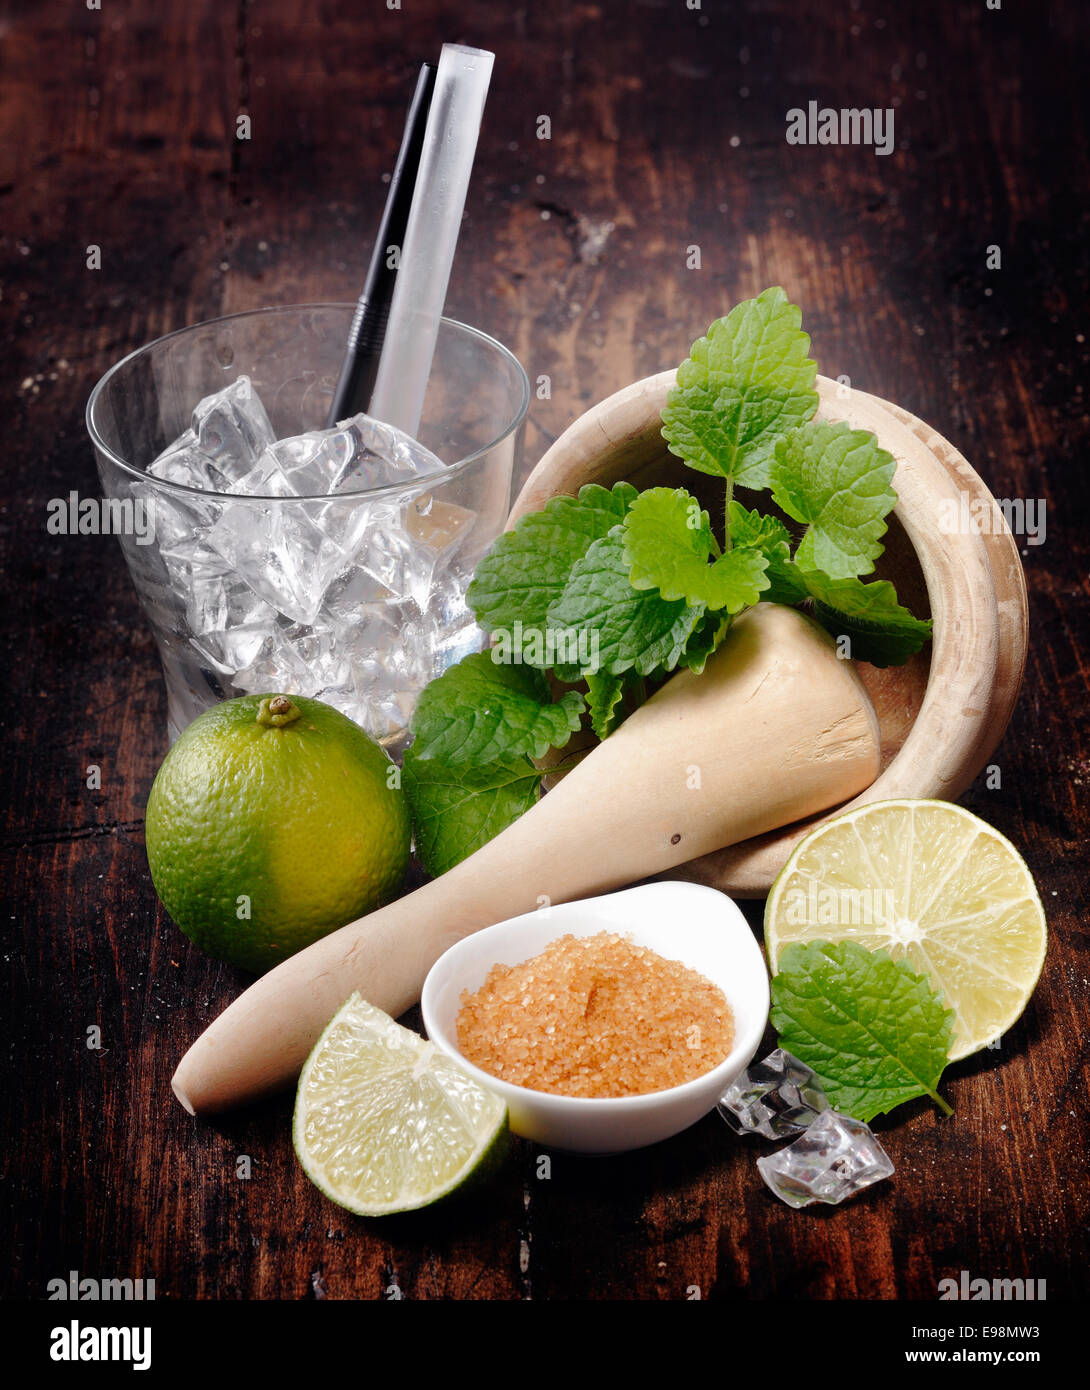 Ingredients for Mojito and Caipirinha. Mortar,Pestle and Lime. Brown sugar and an empty glass with straws Stock Photo